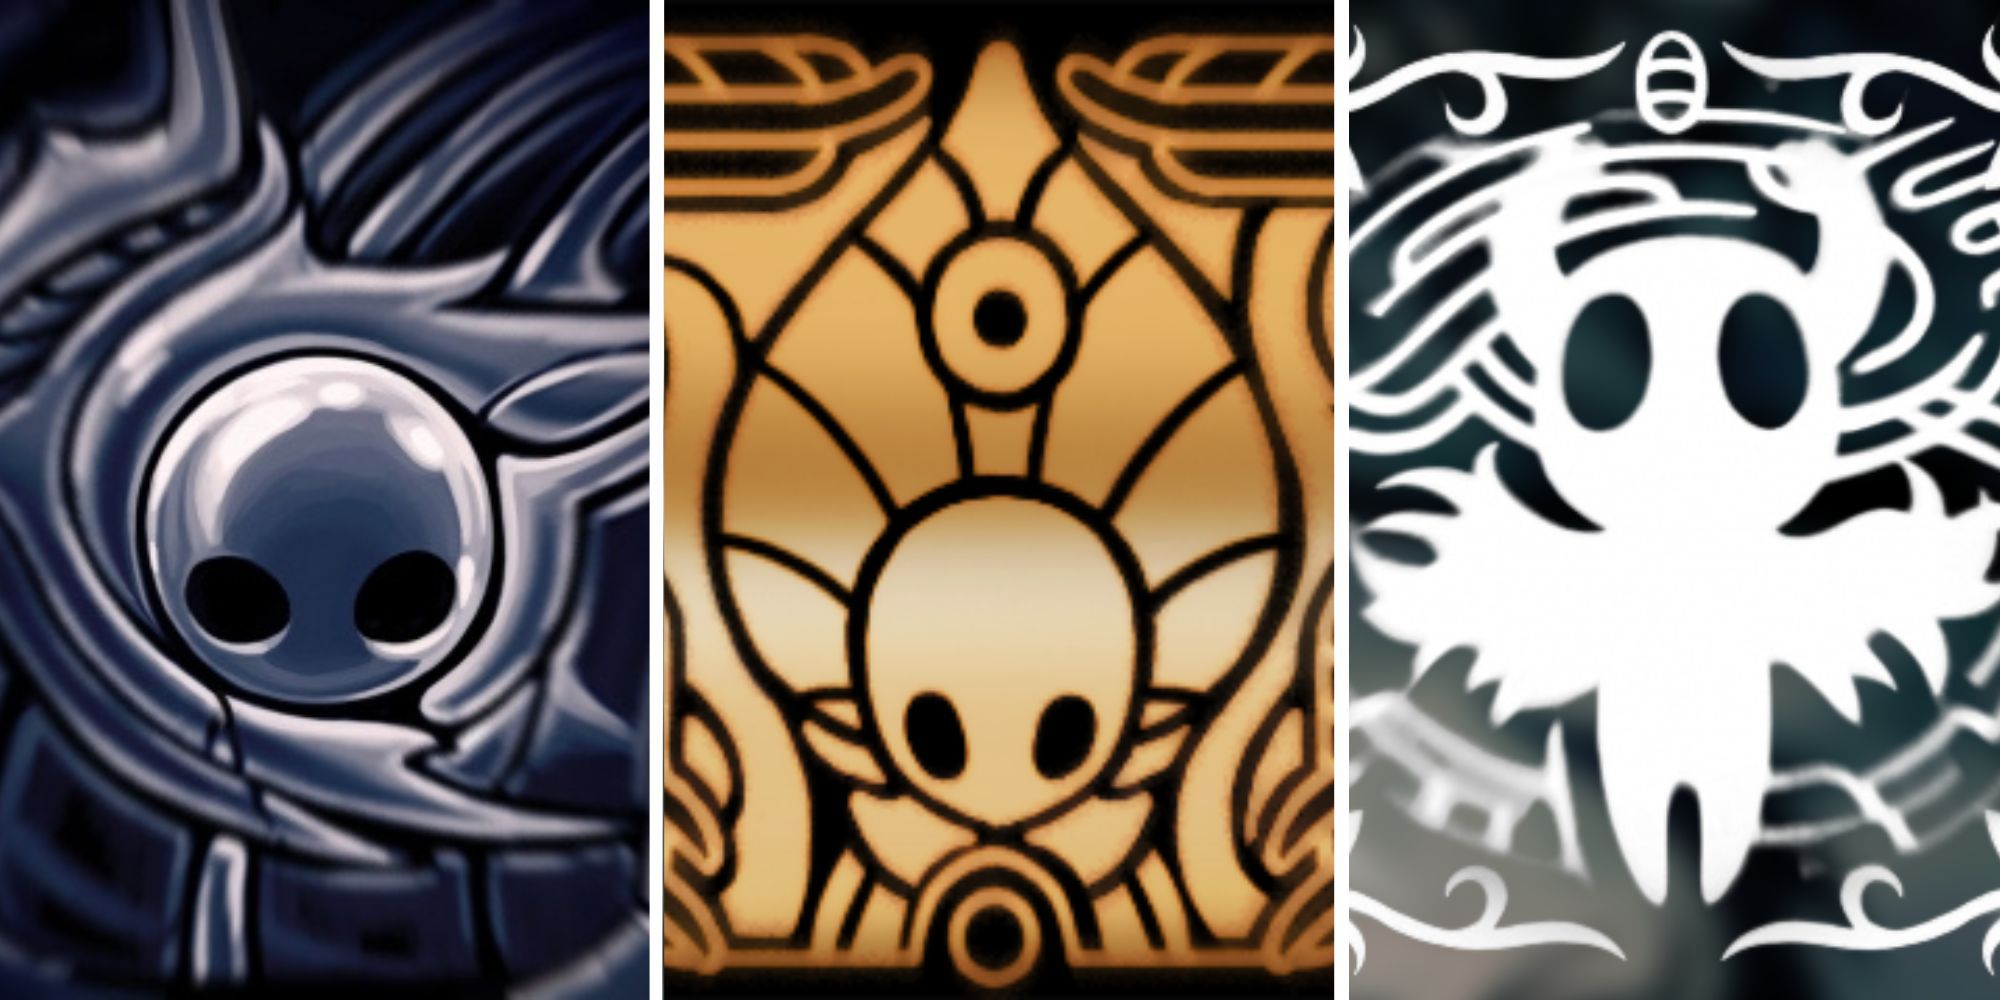 Hollow Knight Achievements: Steel Heart, Embrace the Void, Pure Completion